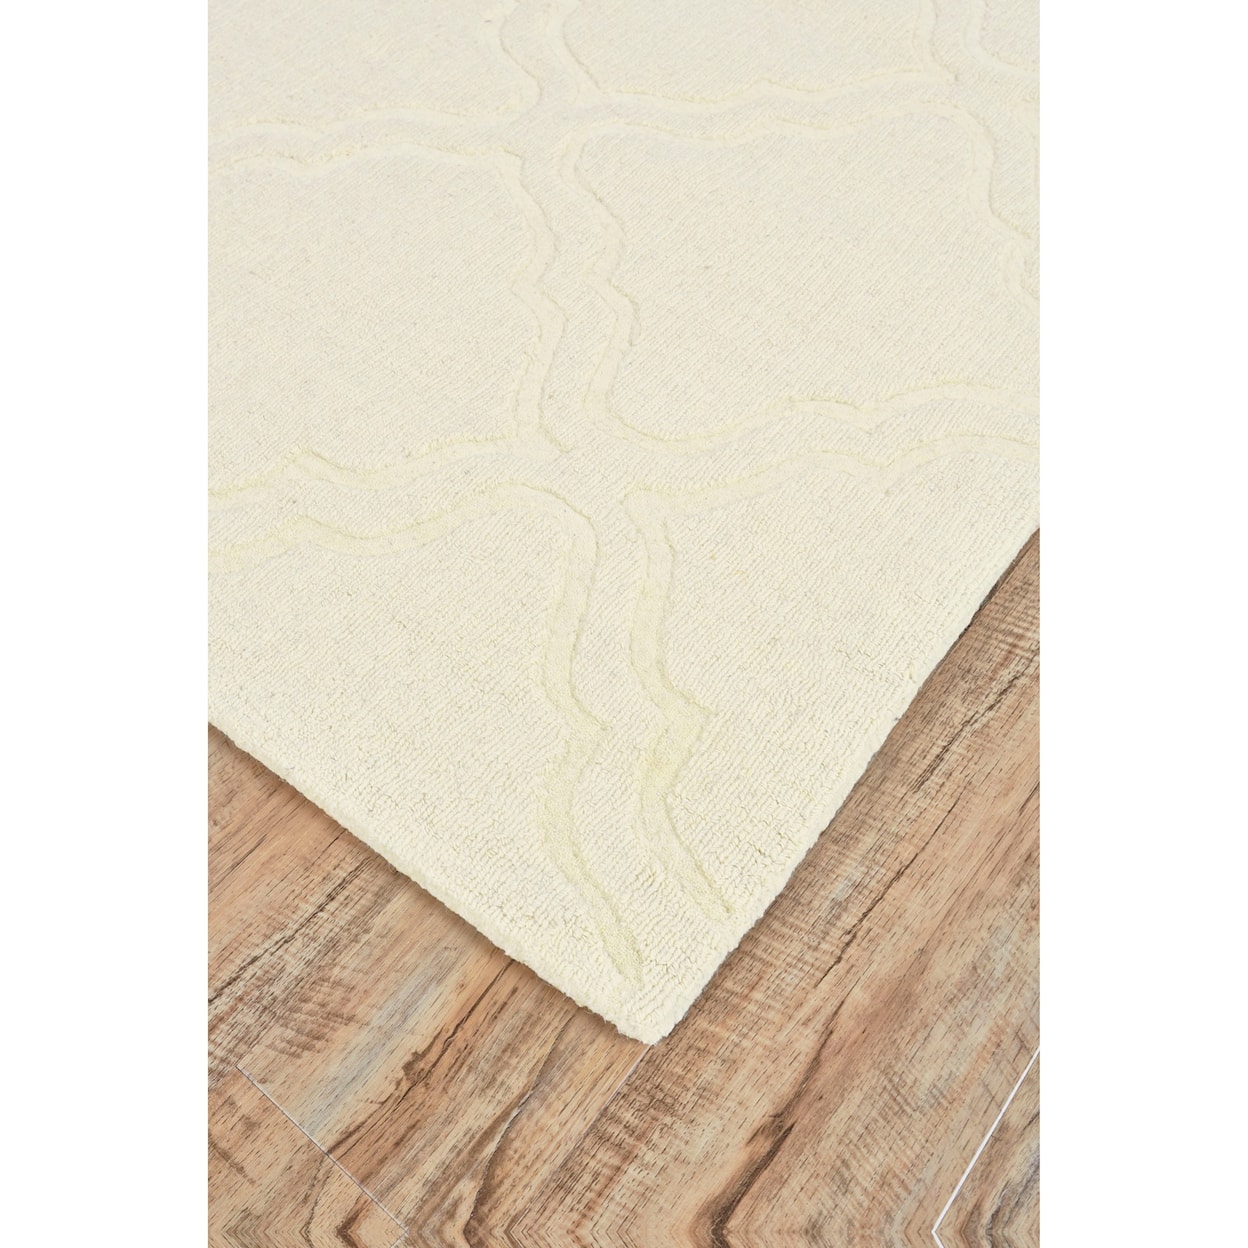 Feizy Rugs Soma Ivory 8' X 11' Area Rug